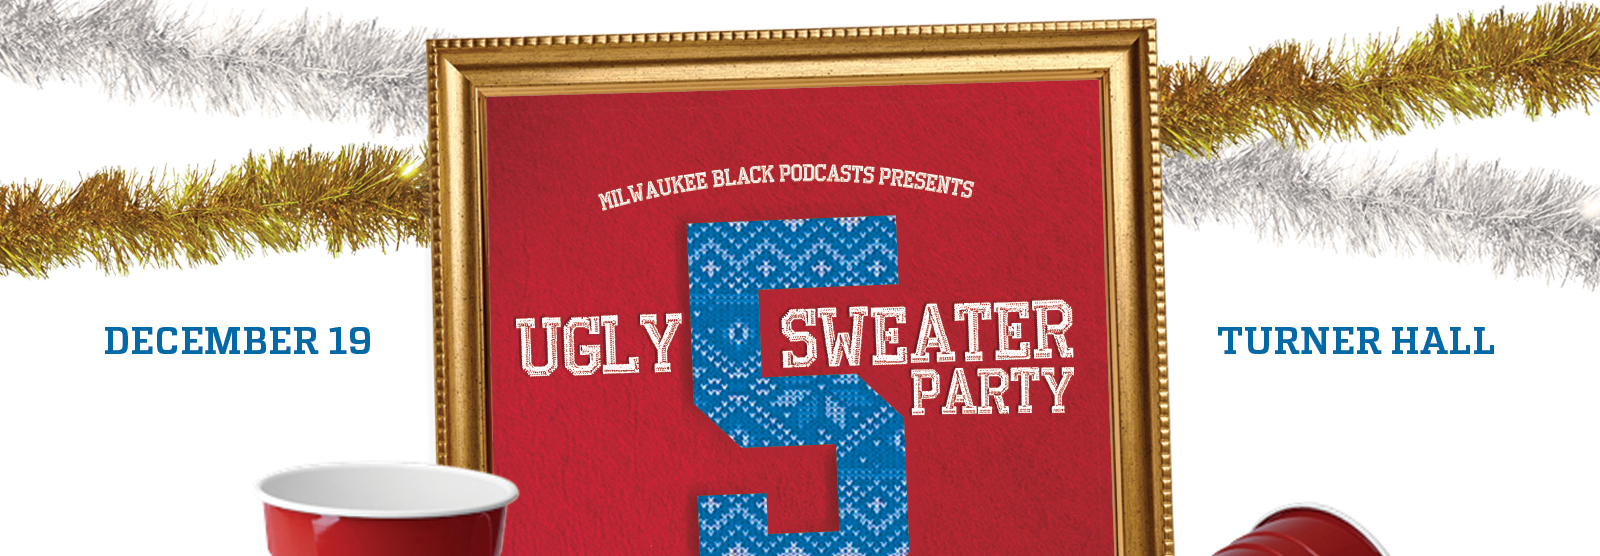 Milwaukee Black Podcasts Presents: Ugly Sweater Party 5